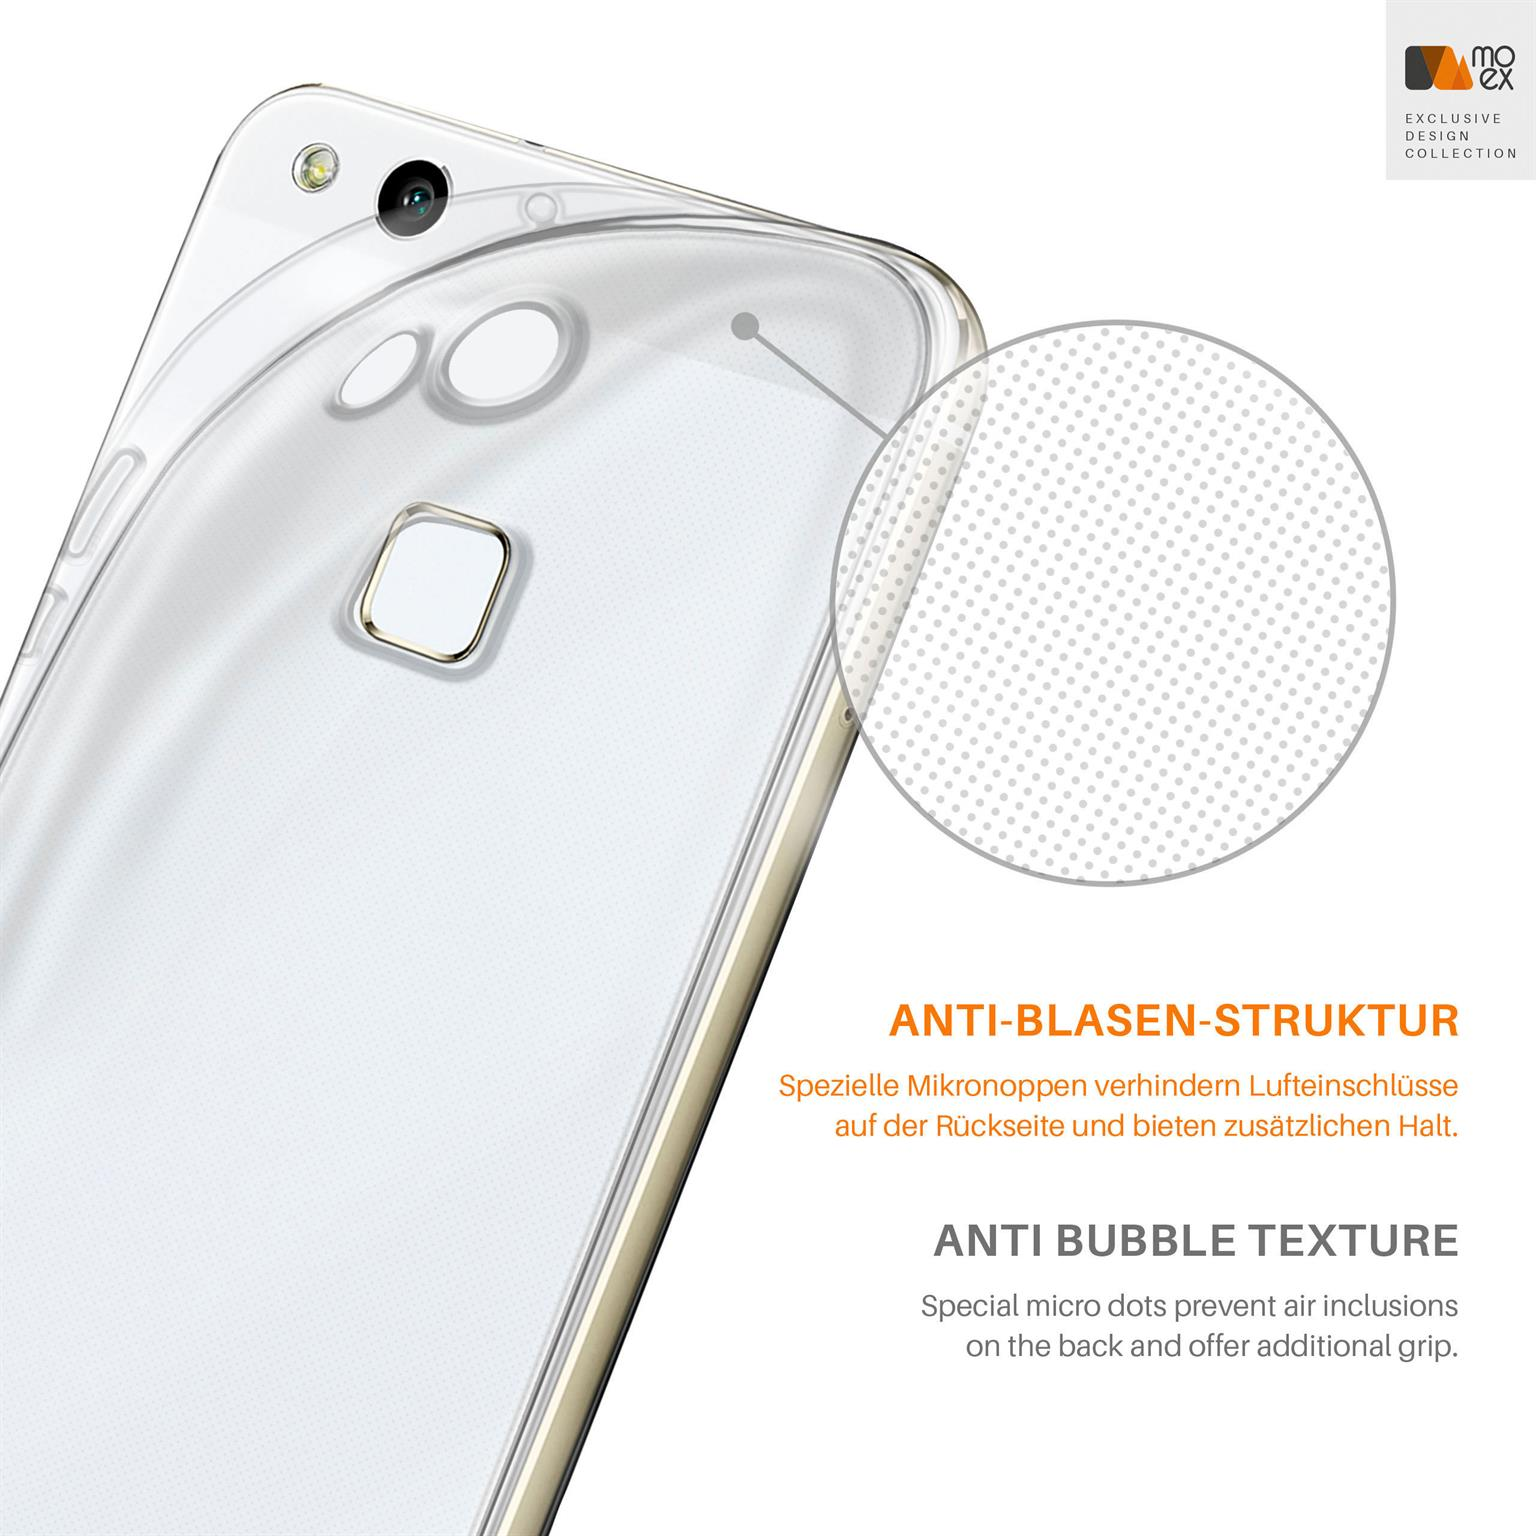 MOEX Backcover, Lite, Aero P10 Crystal-Clear Case, Huawei,